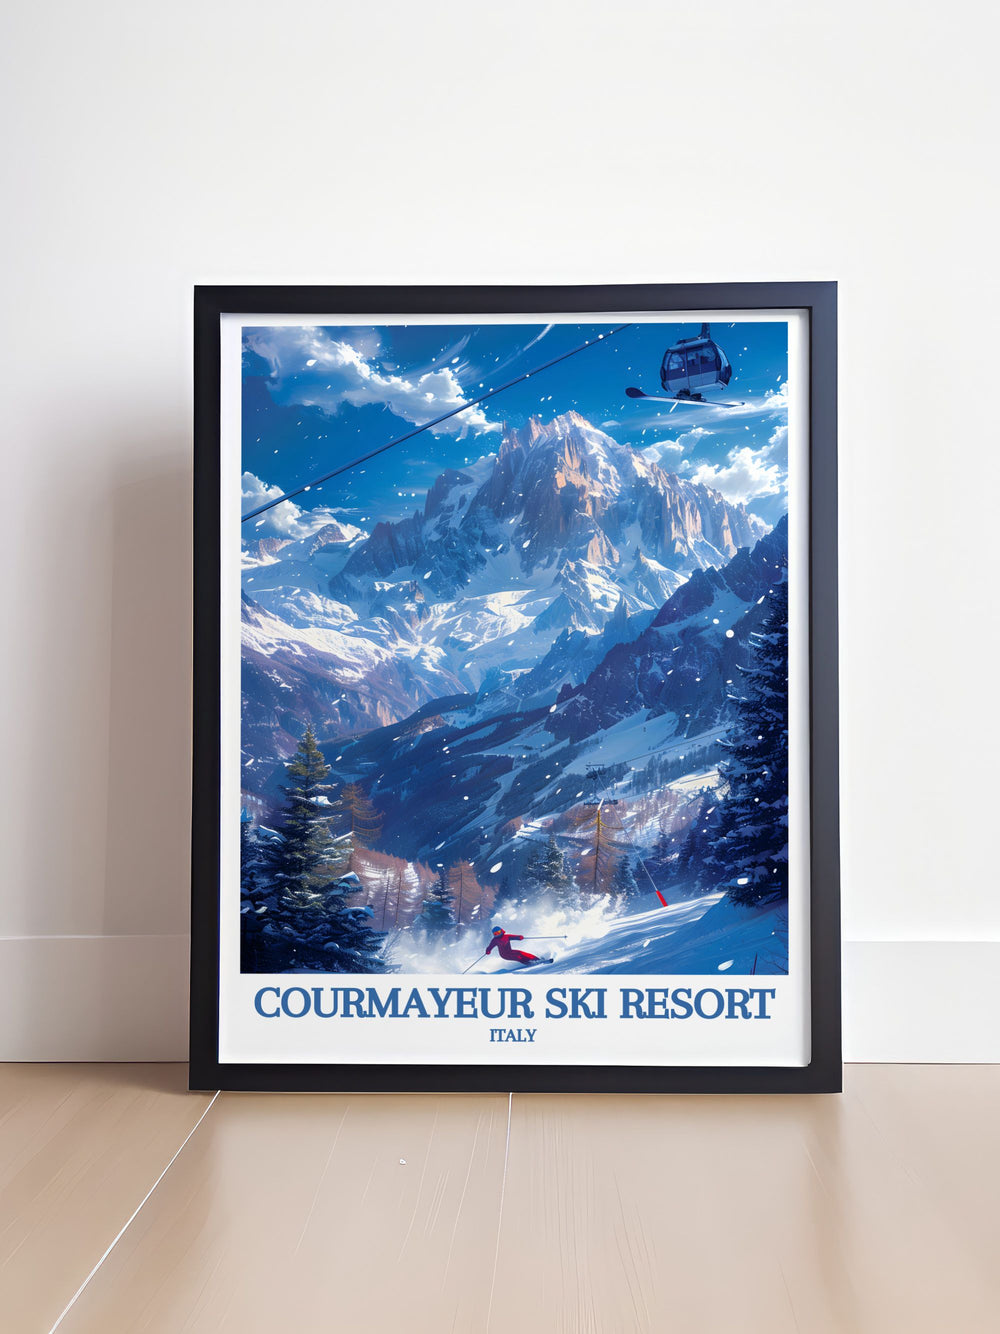 The majestic scenery of Courmayeur and the iconic beauty of Mont Blanc are featured in this vibrant travel poster, perfect for adding Italys unique charm and elegance to your home.